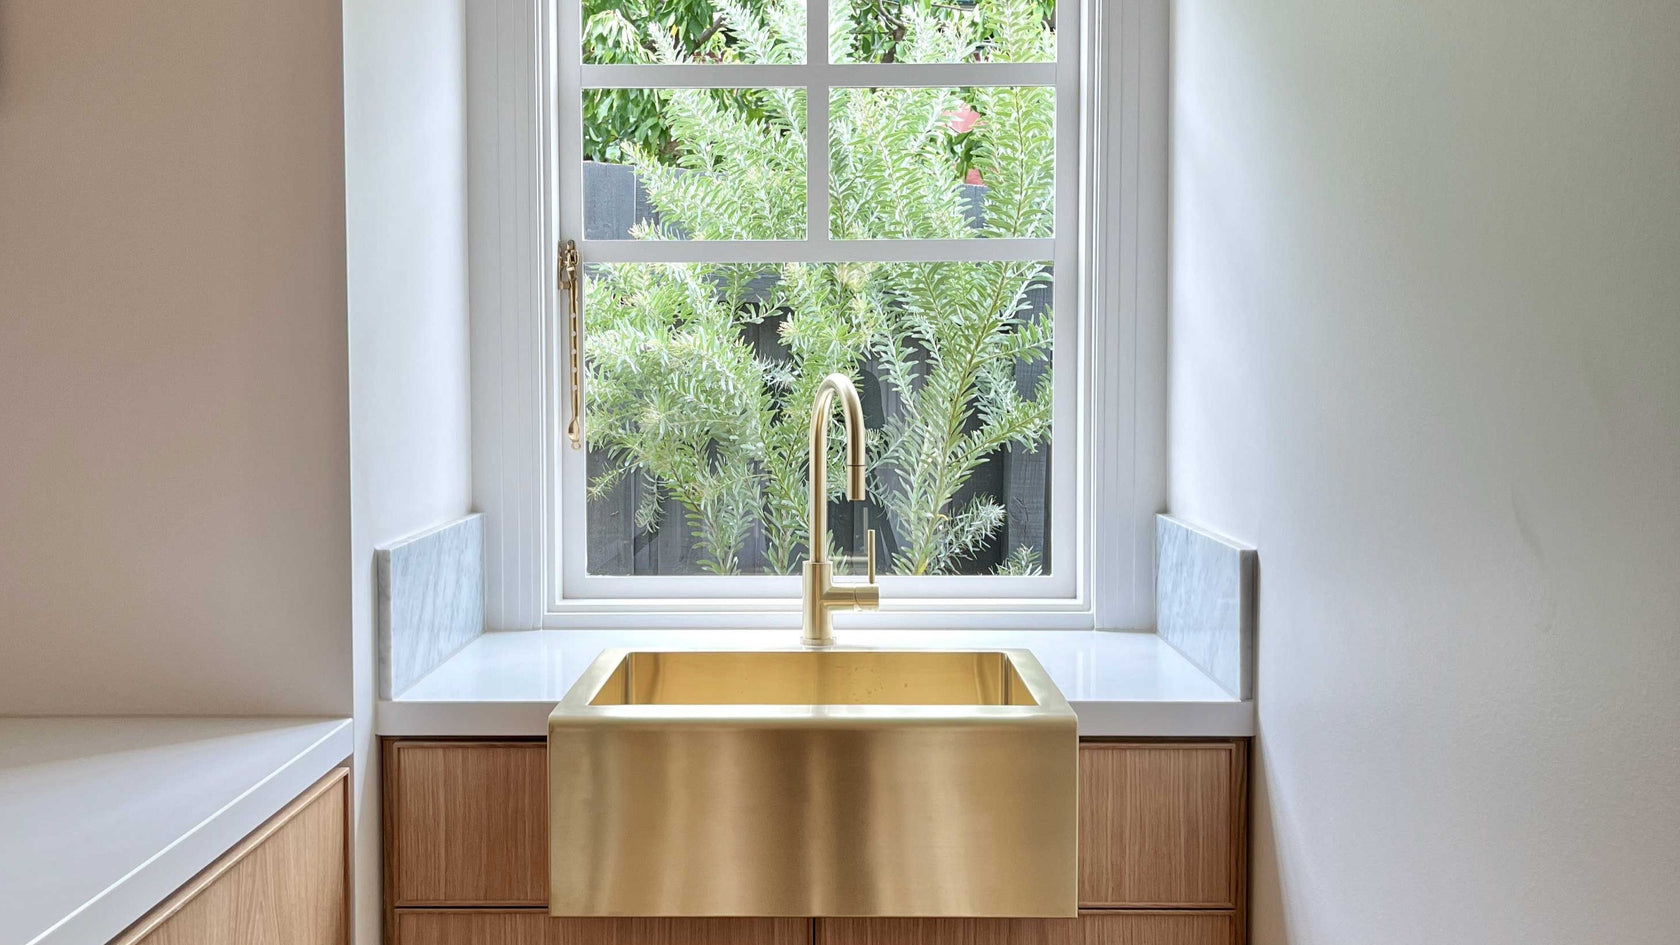 Luxury Timber Kitchen Cabinetry with Marble Benchtop Brass Sink window looking out to garden